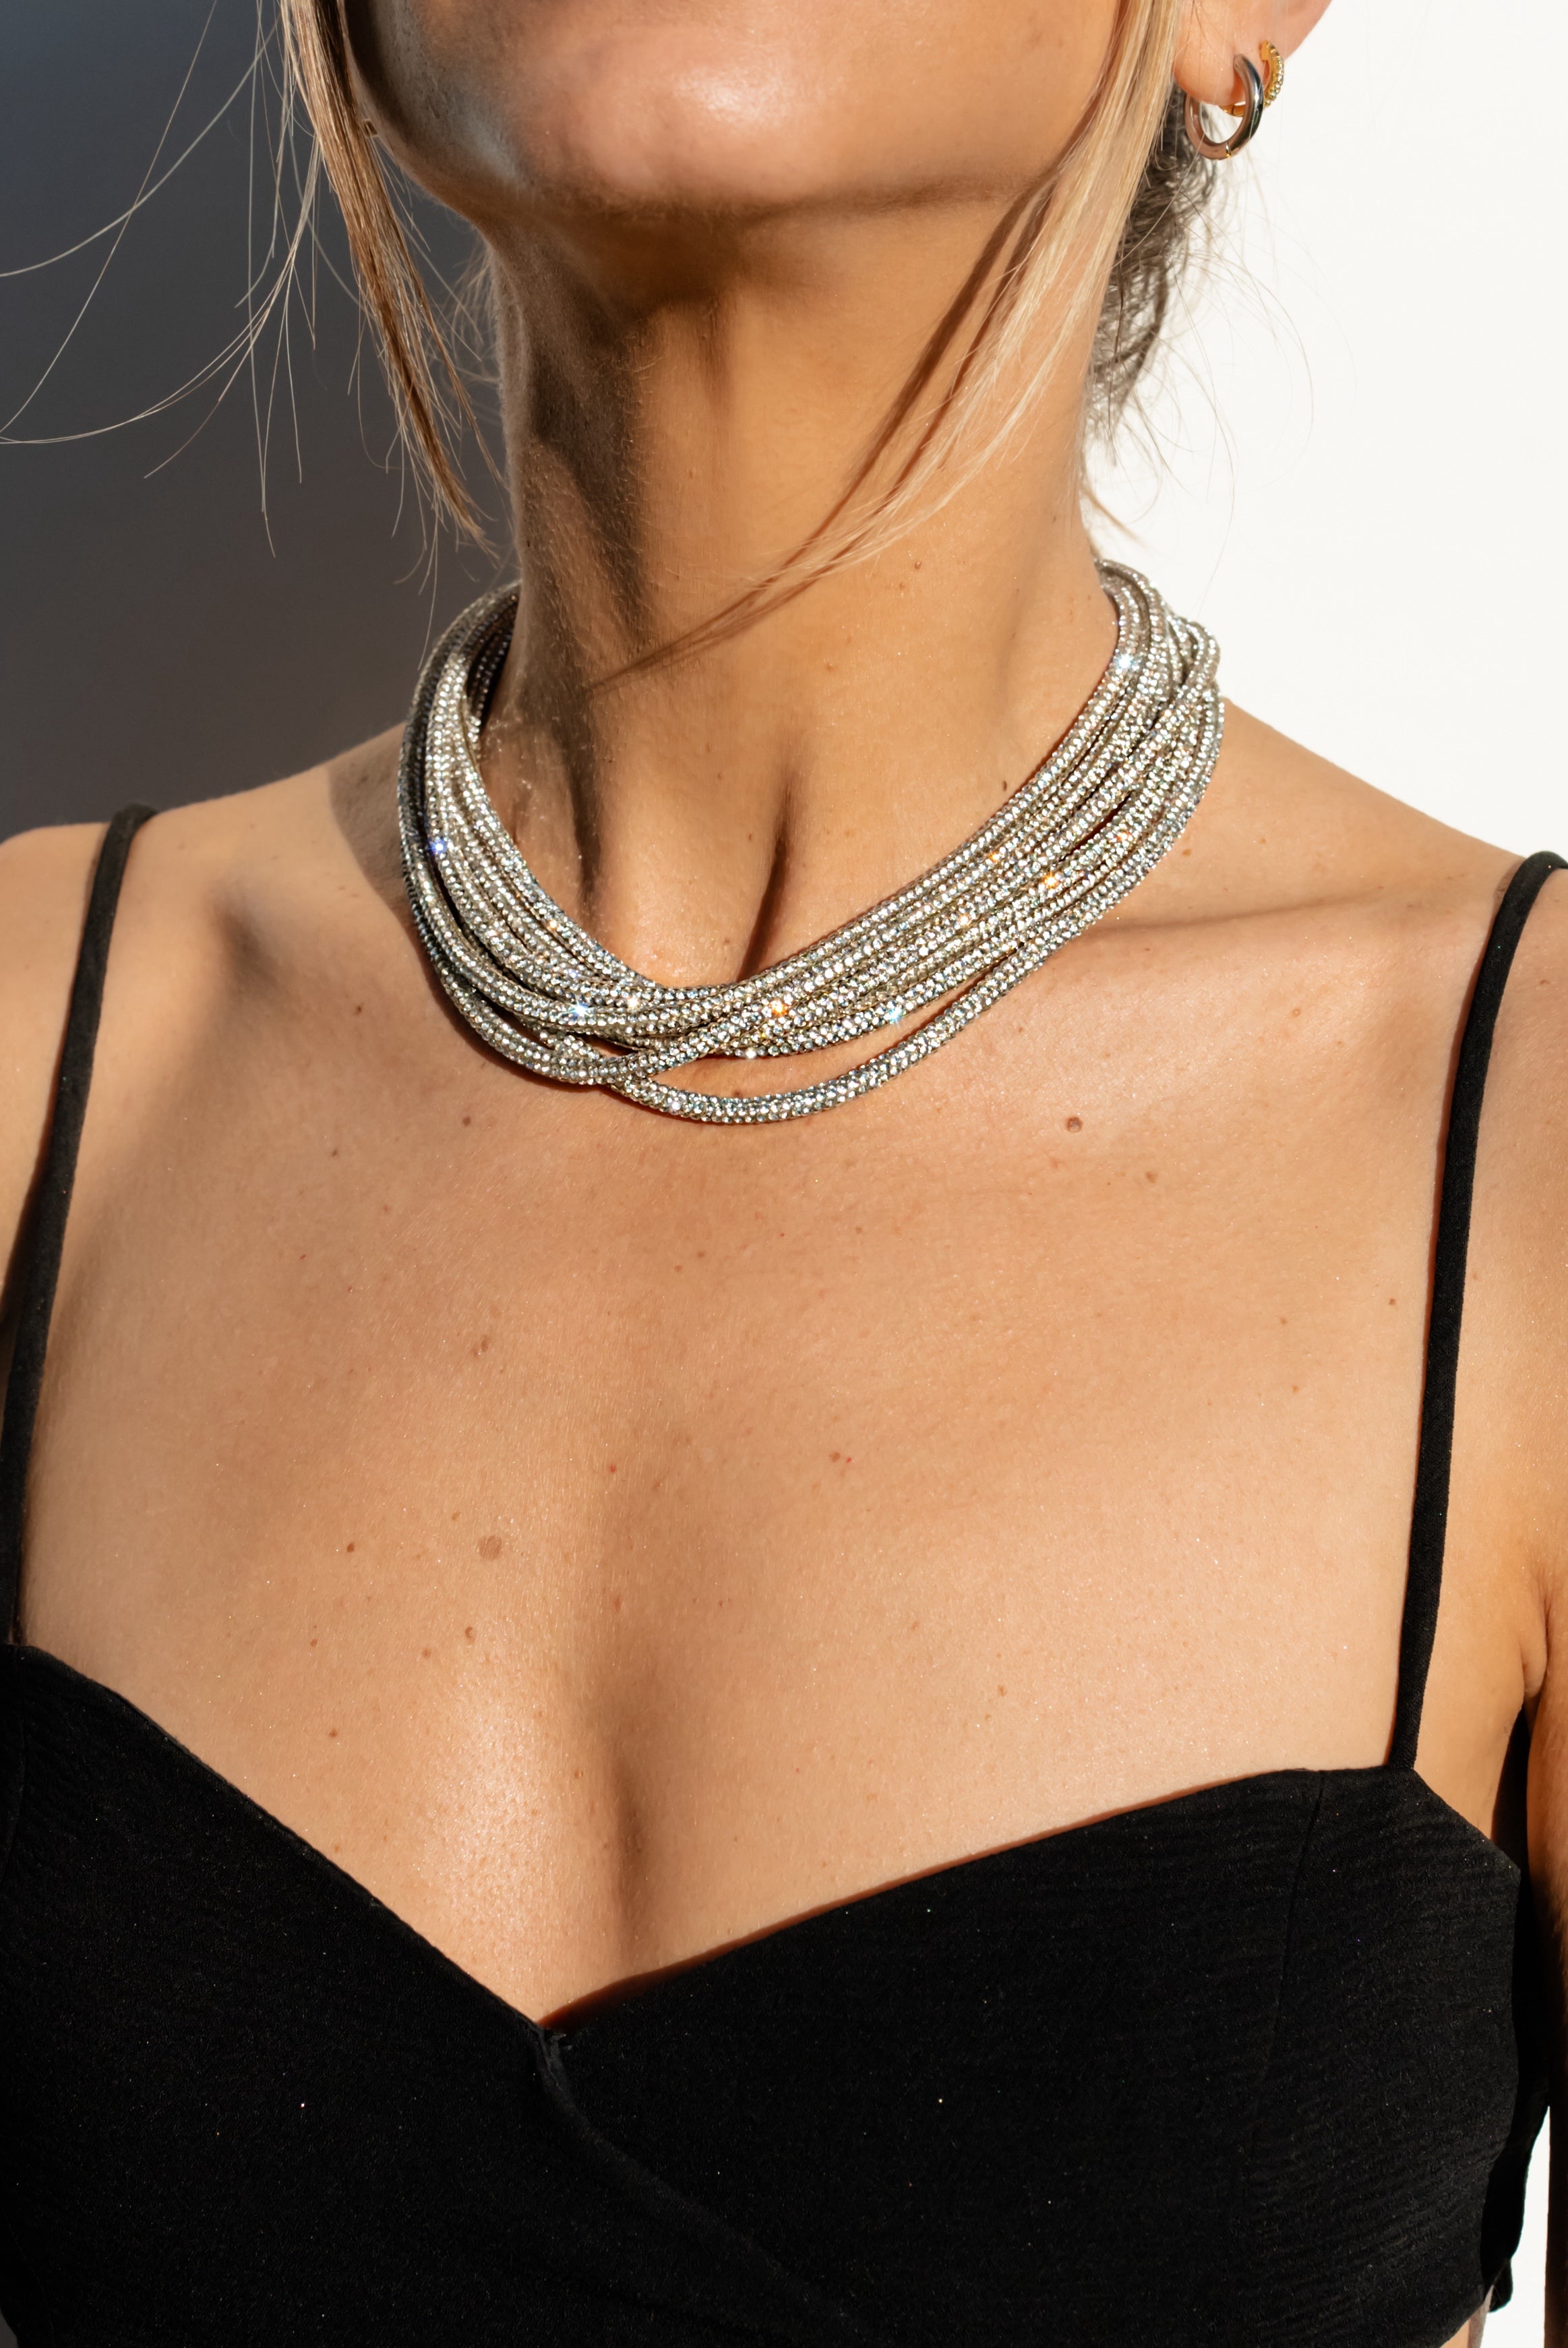 Black Leather Sparkly Snakeskin Choker Necklace with Silver Extender Chain & Swarovski Crystal